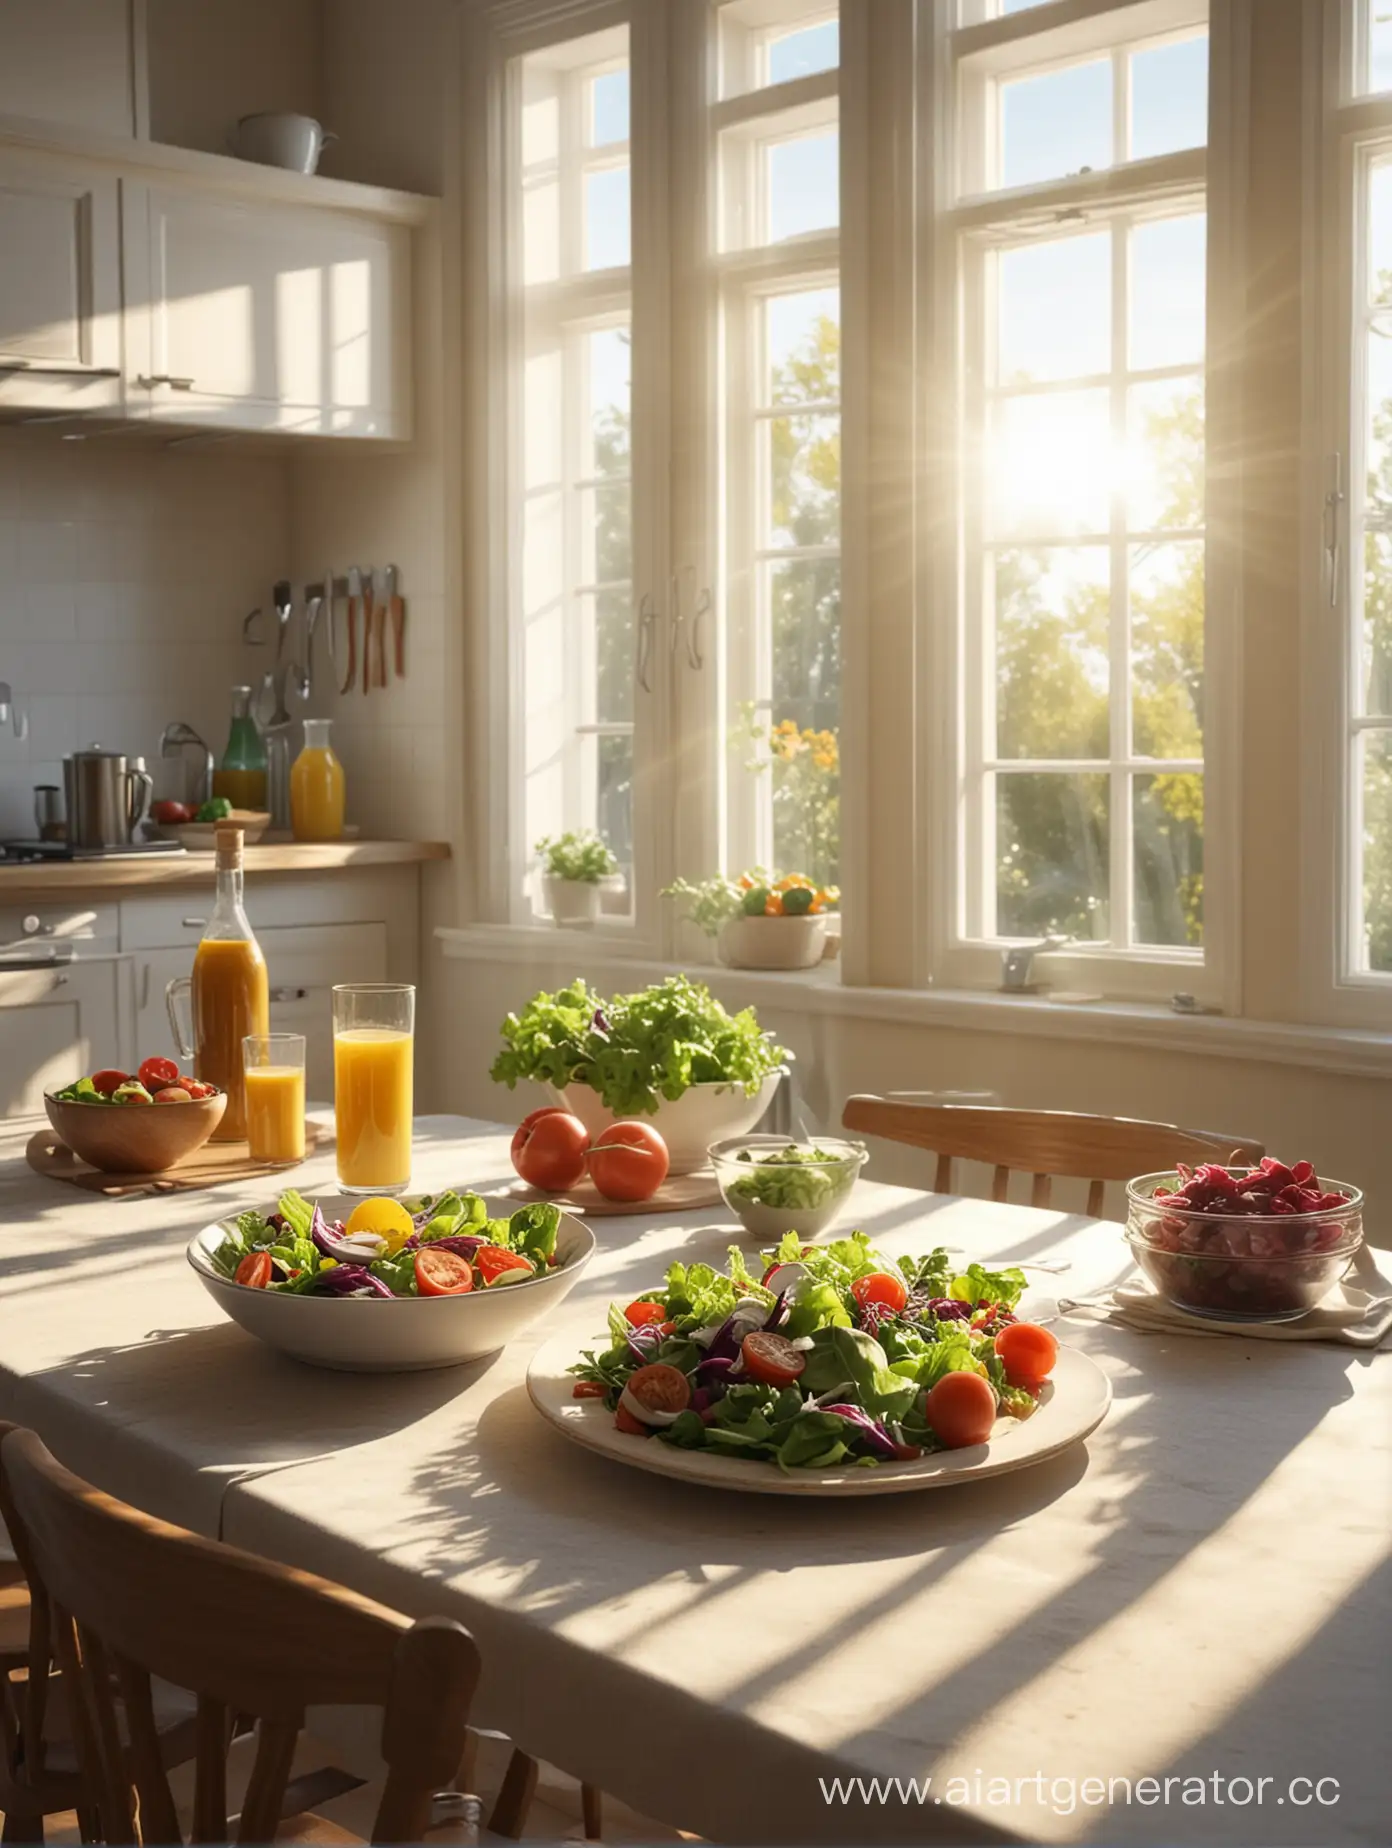 Sunlit-Kitchen-with-Fresh-Salad-on-Table-in-a-Luxurious-Home